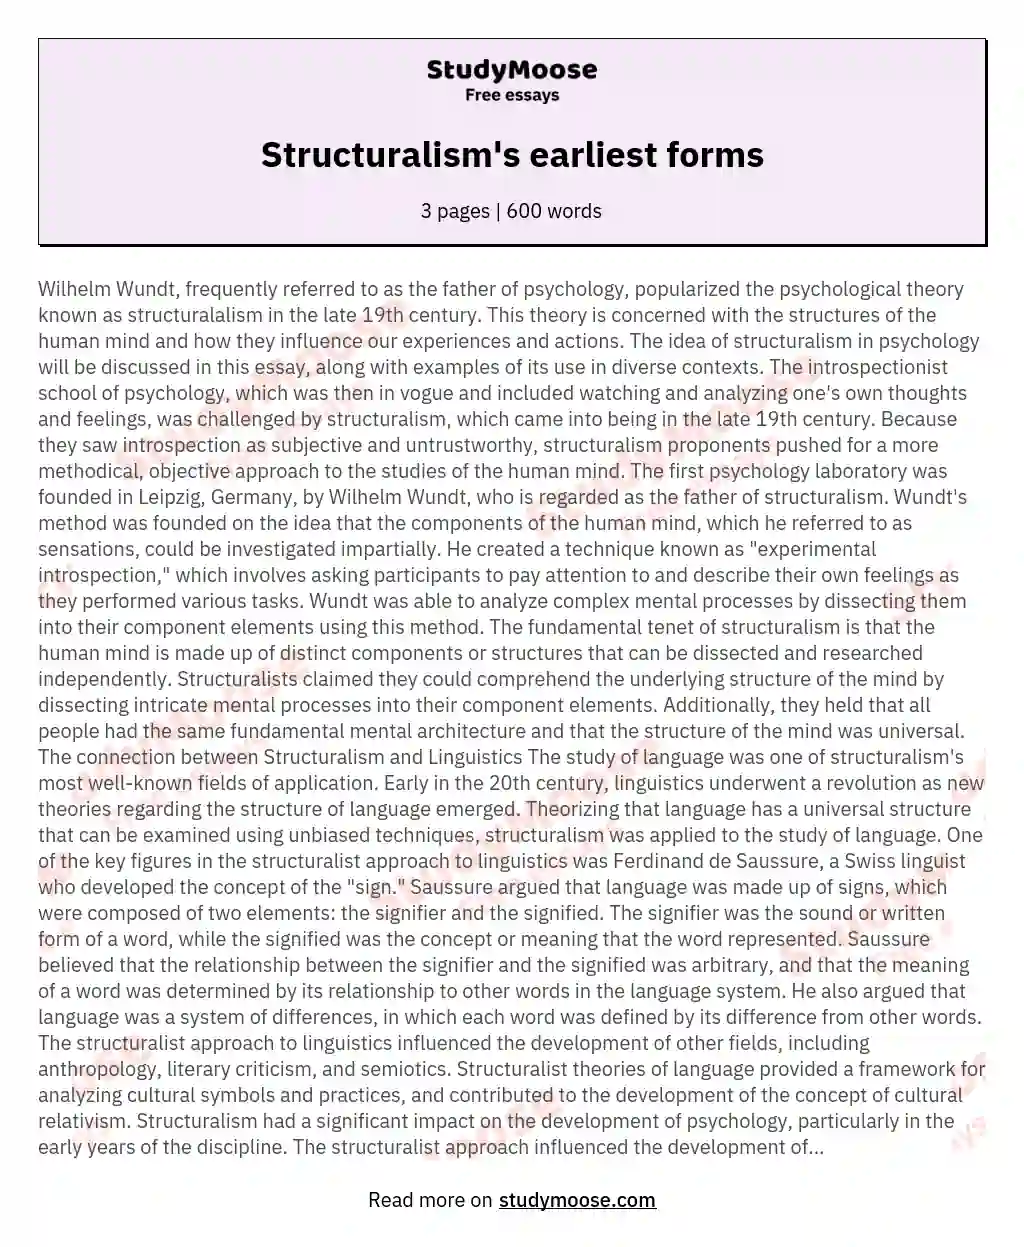 Structuralism's earliest forms essay